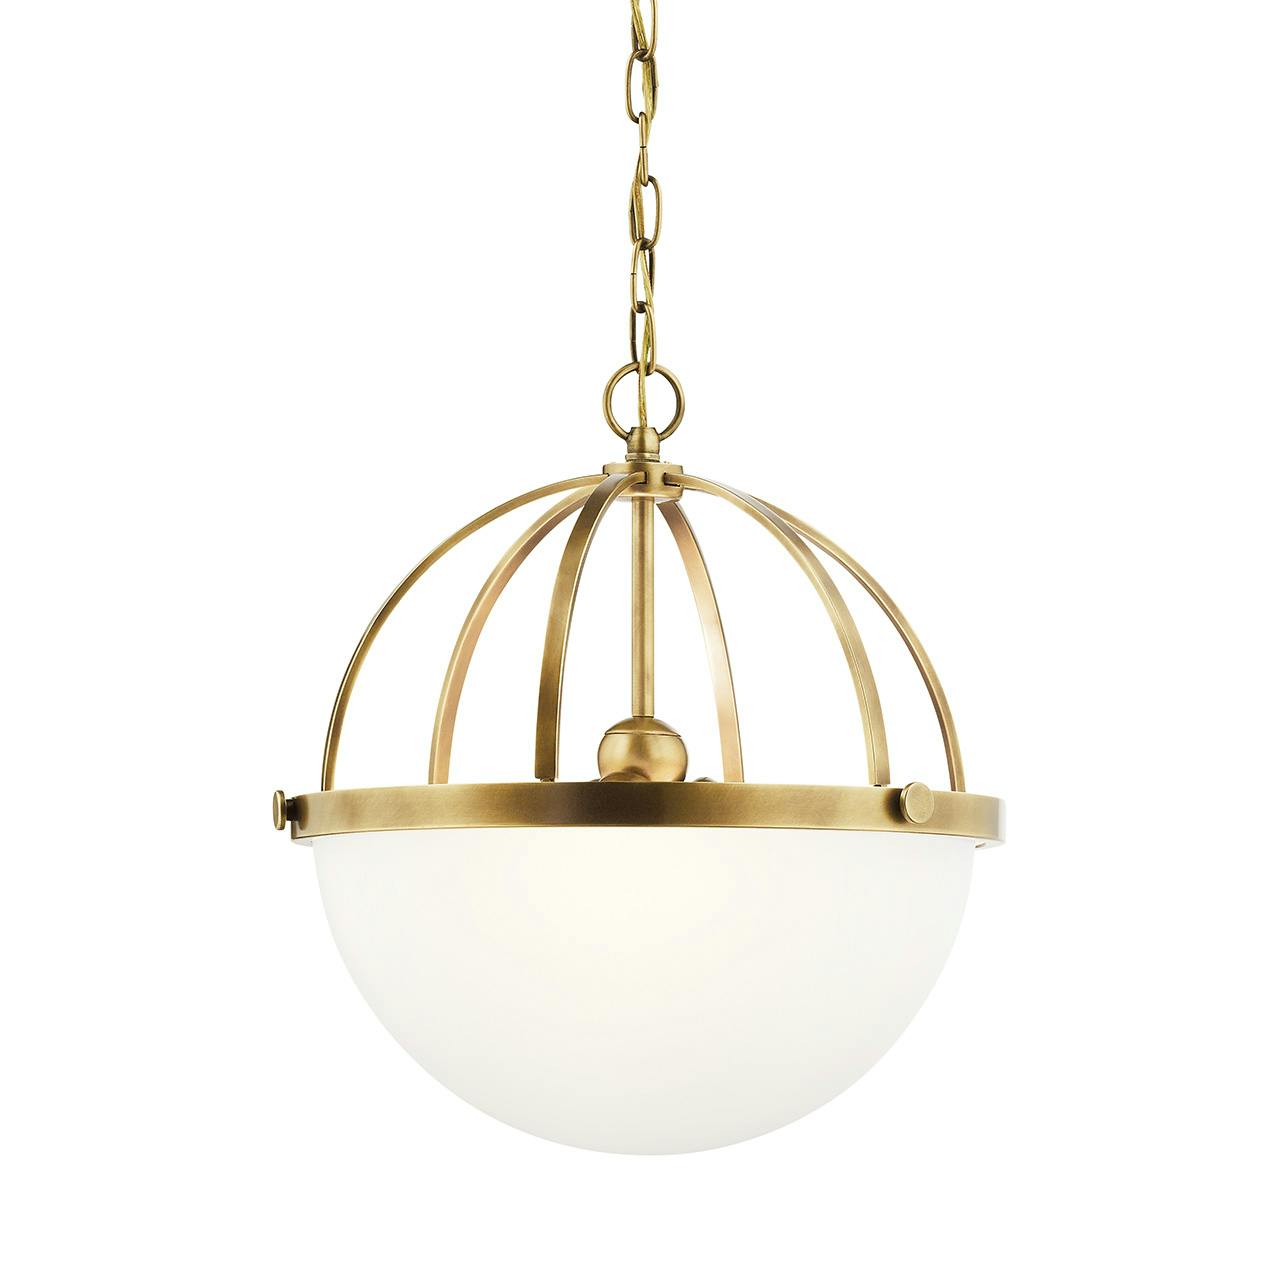 Edmar™ 3 Light Pendant Natural Brass without the canopy on a white background